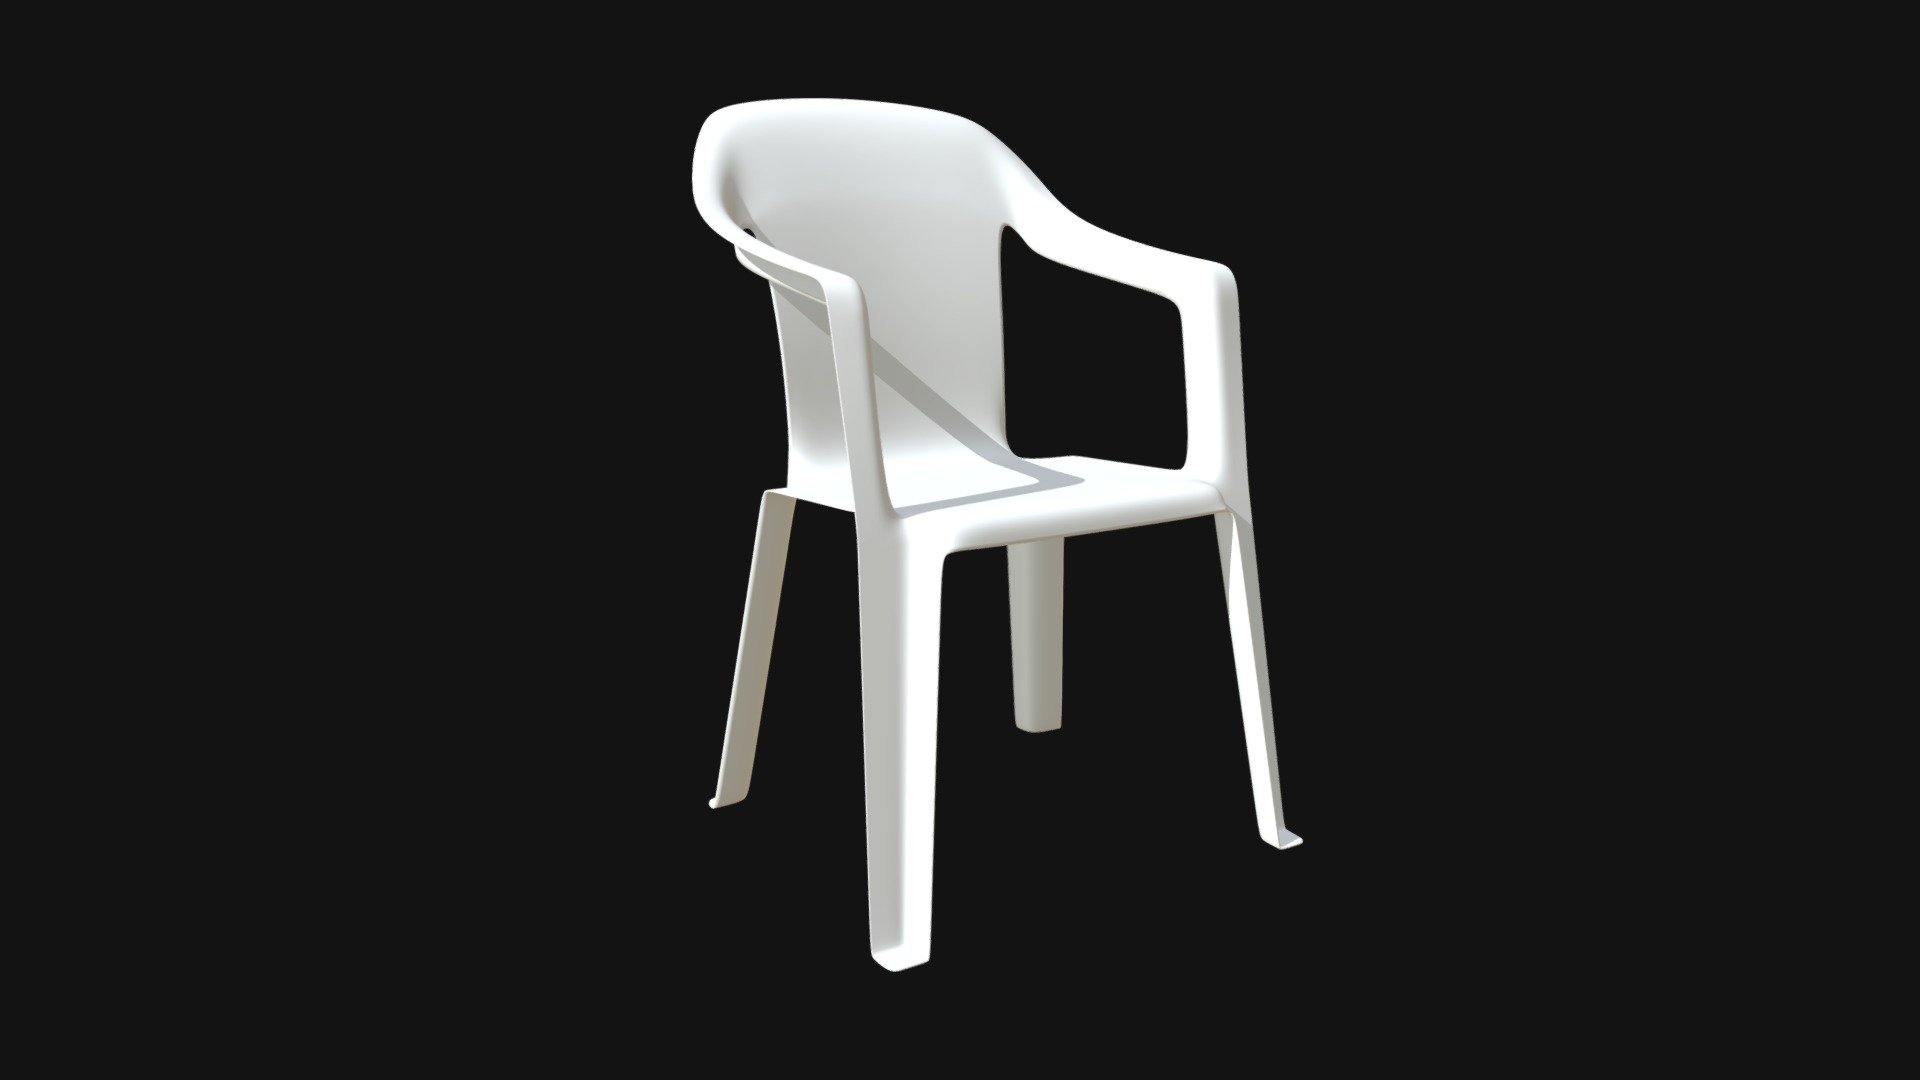 === The following description refers to the additional ZIP package provided with this model ===

Plastic chair 3D Model, nr. 1 in my collection. Production-ready 3D Model, with PBR materials, textures, non overlapping UV Layout map provided in the package.

Quads only geometries (no tris/ngons).

Formats included: FBX, OBJ; scenes: BLEND (with Cycles / Eevee PBR Materials and Textures); other: png with Alpha.

1 Object (mesh), 1 PBR Material, UV unwrapped (non overlapping UV Layout map provided in the package); UV-mapped Textures.

UV Layout maps and Image Textures resolutions: 2048x2048; PBR Textures made with Substance Painter.

Polygonal, QUADS ONLY (no tris/ngons); 21522 vertices, 21524 quad faces (43048 tris).

Real world dimensions; scene scale units: cm in Blender 3.1 (that is: Metric with 0.01 scale).

Uniform scale object (scale applied in Blender 3.1) 3d model